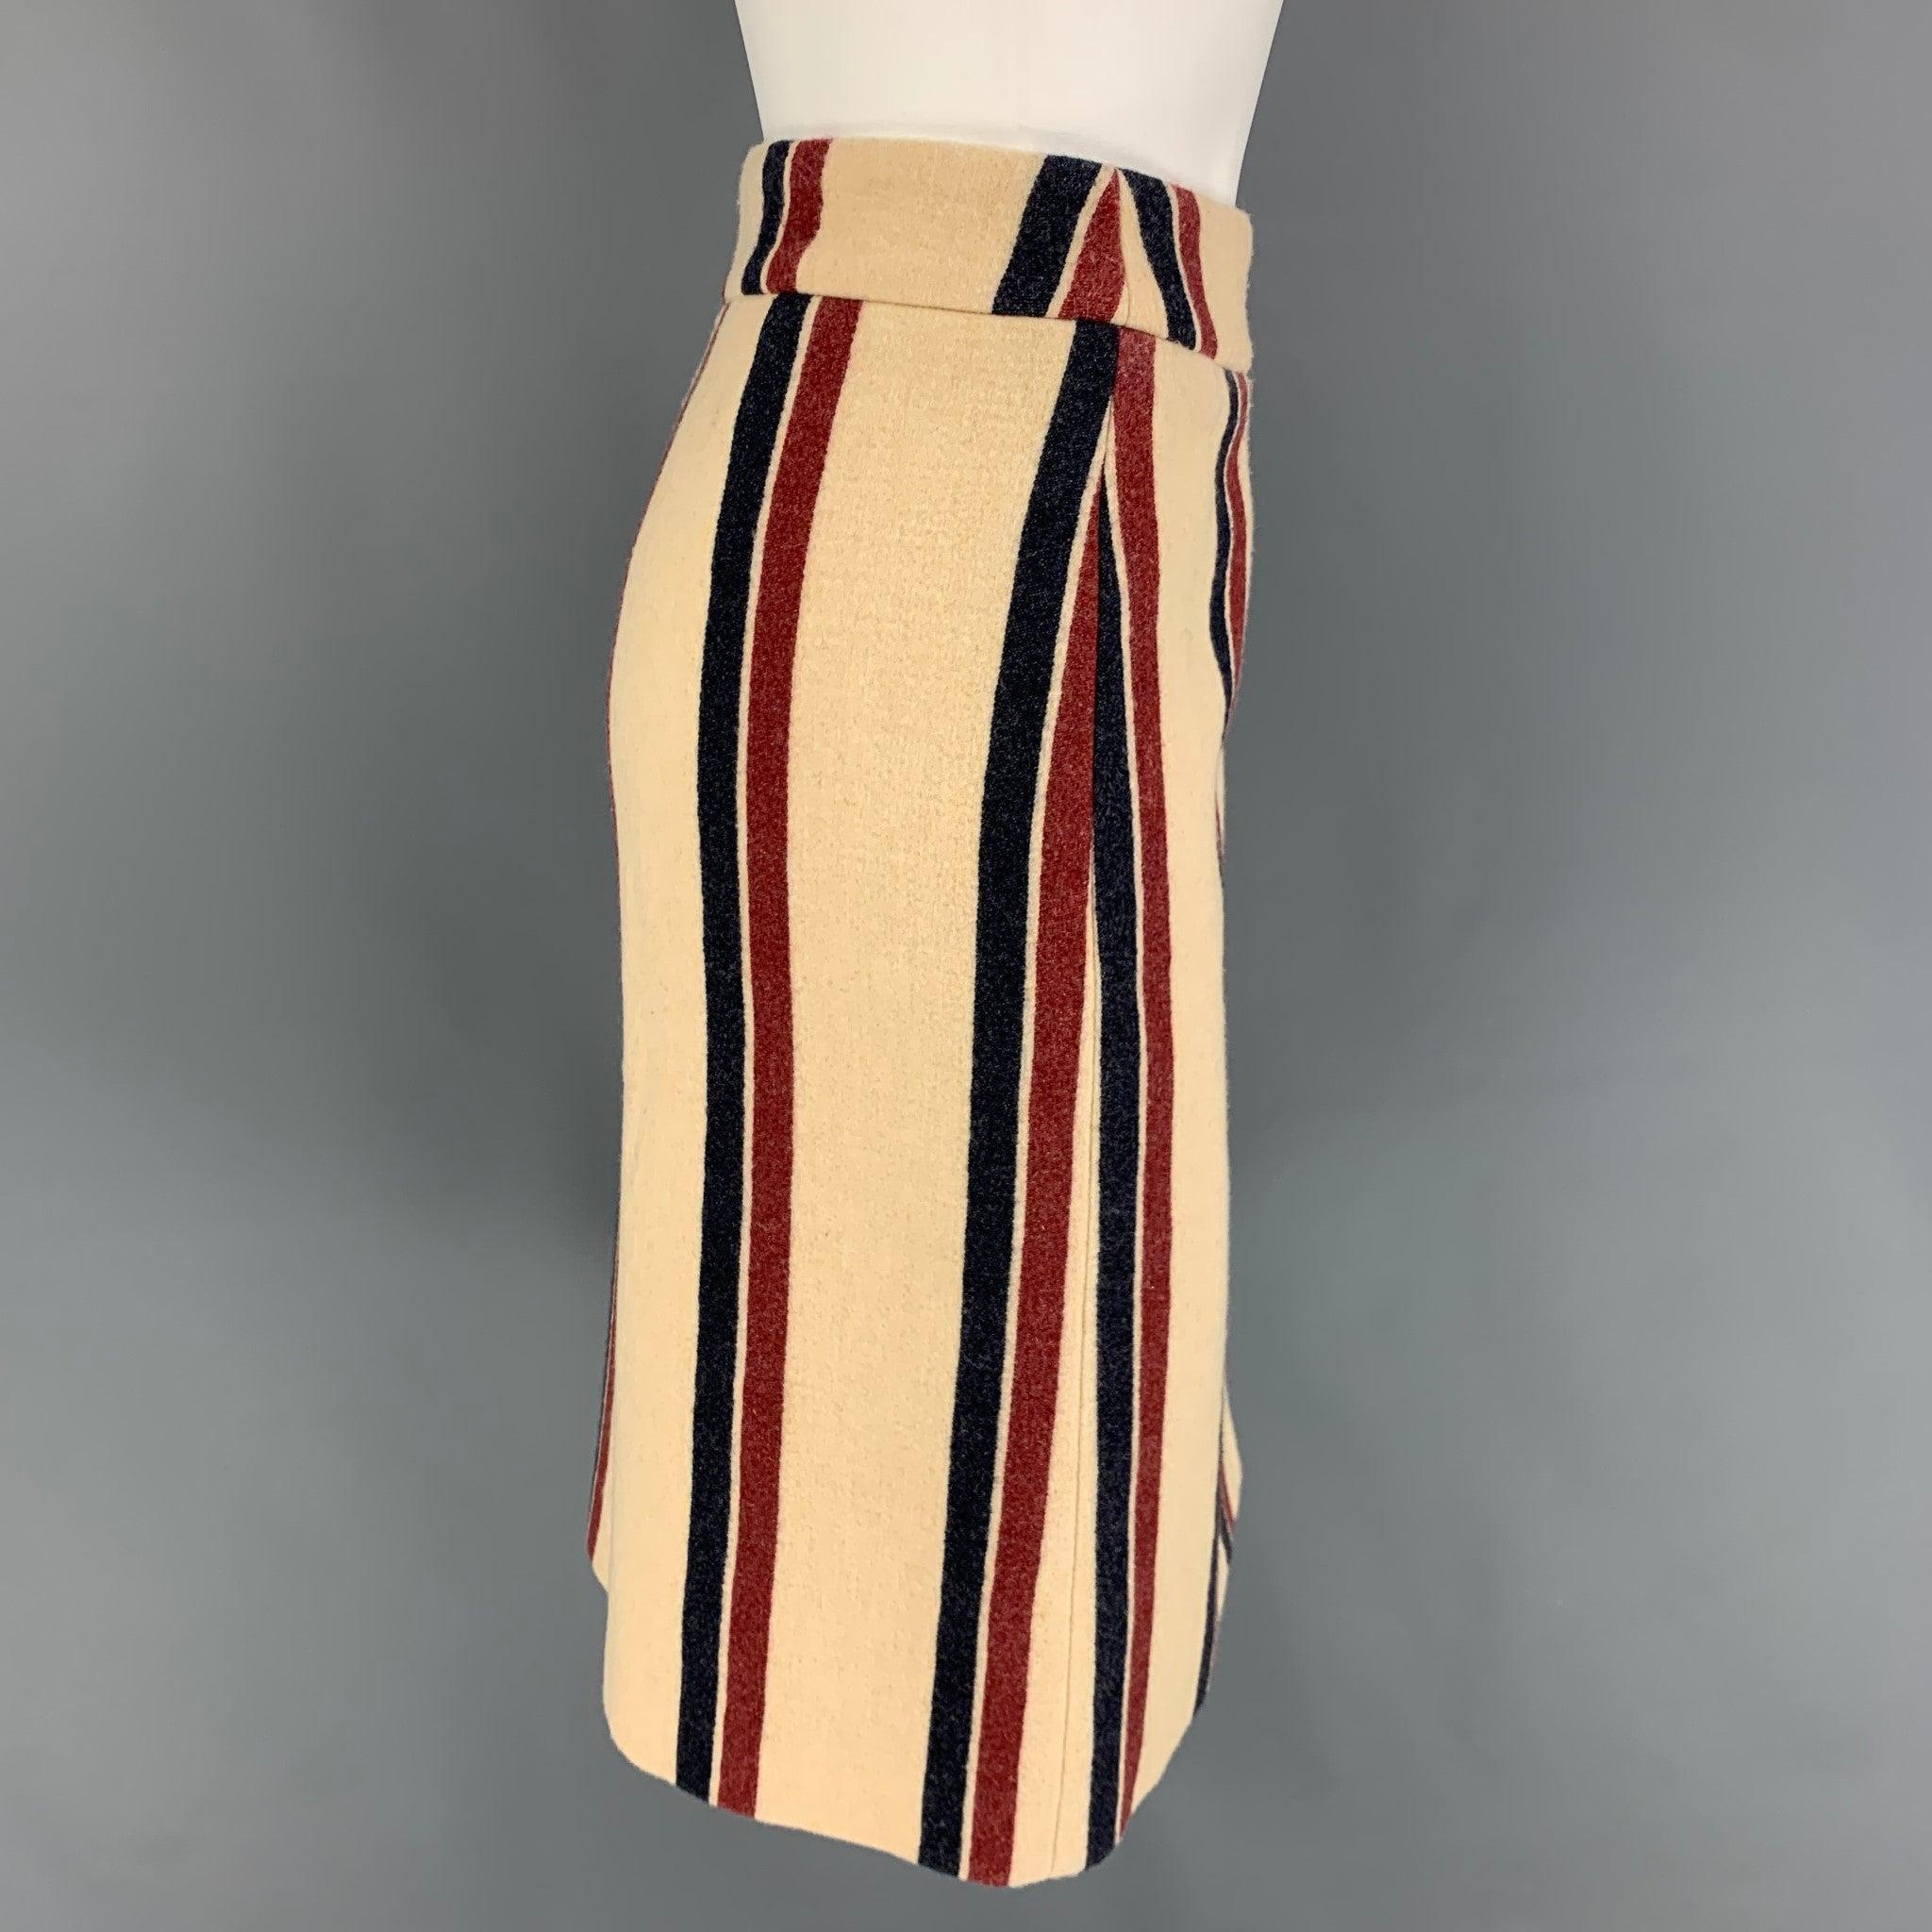 DRIES VAN NOTEN skirt comes in a cream & red stripe wool / polyamide featuring a pencil style and a back zip up closure.
Very Good
Pre-Owned Condition. 

Marked:   40 

Measurements: 
  Waist: 34 inches  Hip: 40 inches  Length: 23 inches 
  
  
